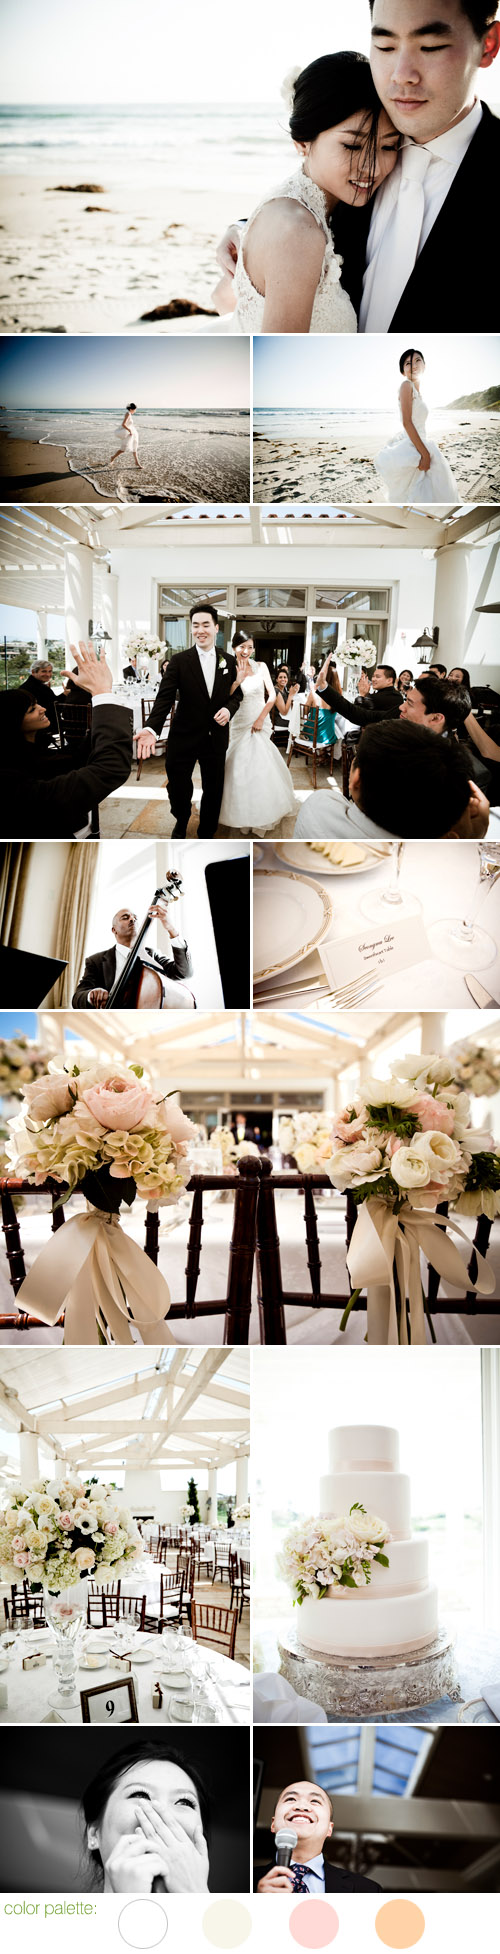 pretty, classic wedding style at the St. Regis Monarch Beach in southern California, photos by Viera Photographics